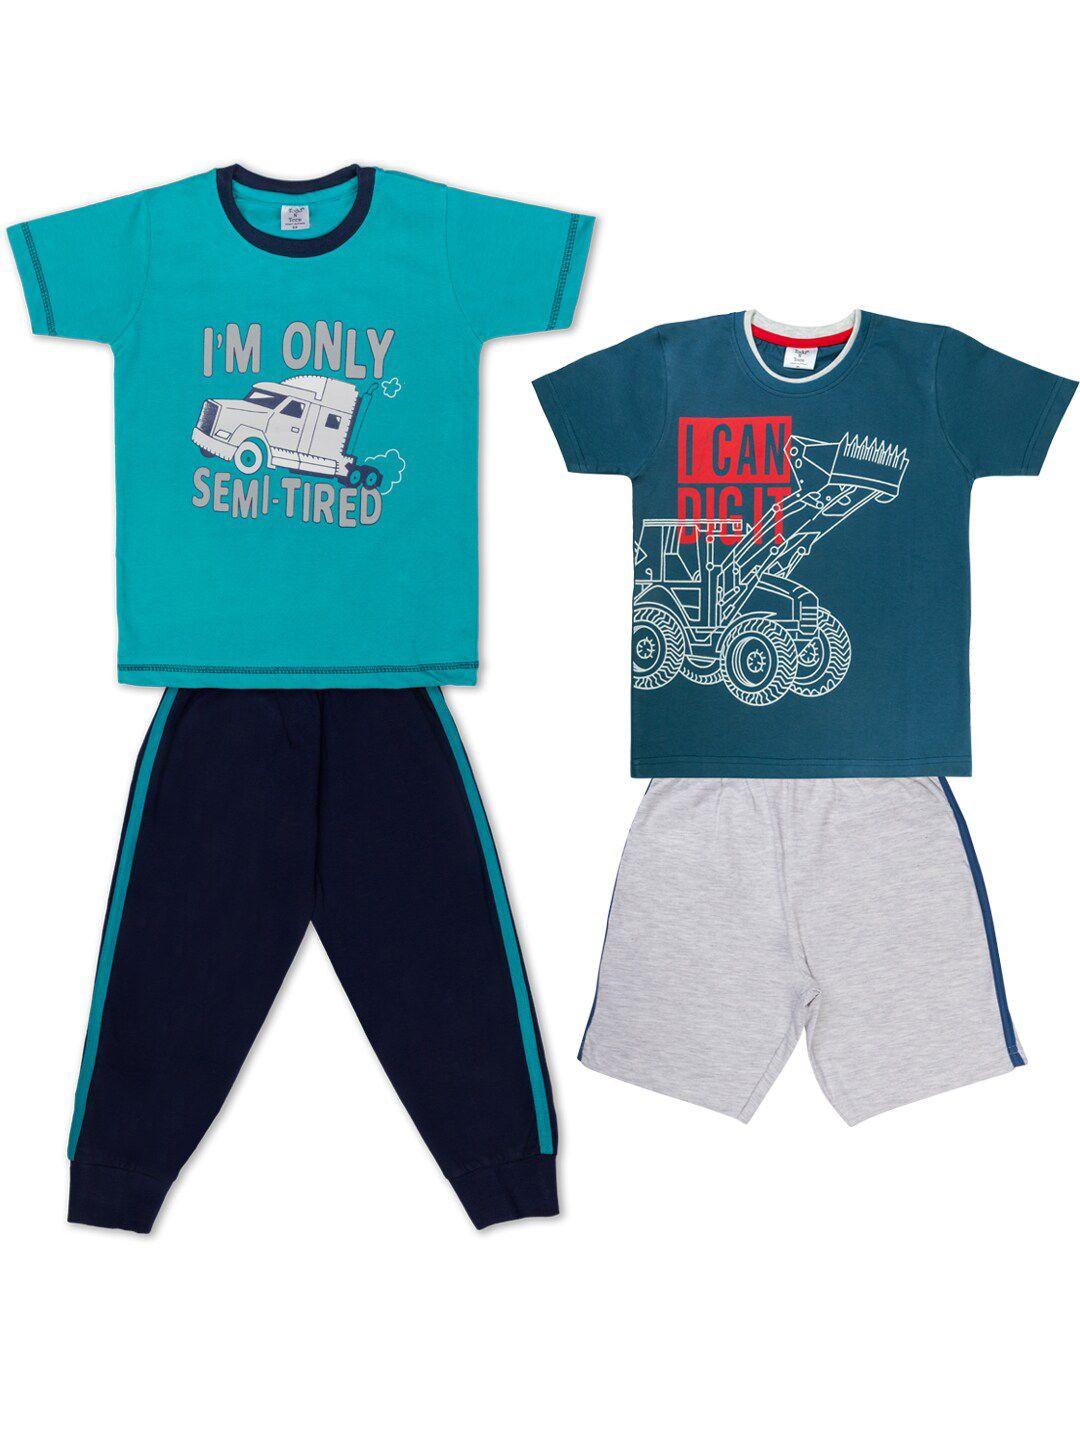 todd n teen boys pack of 2 pure cotton clothing set